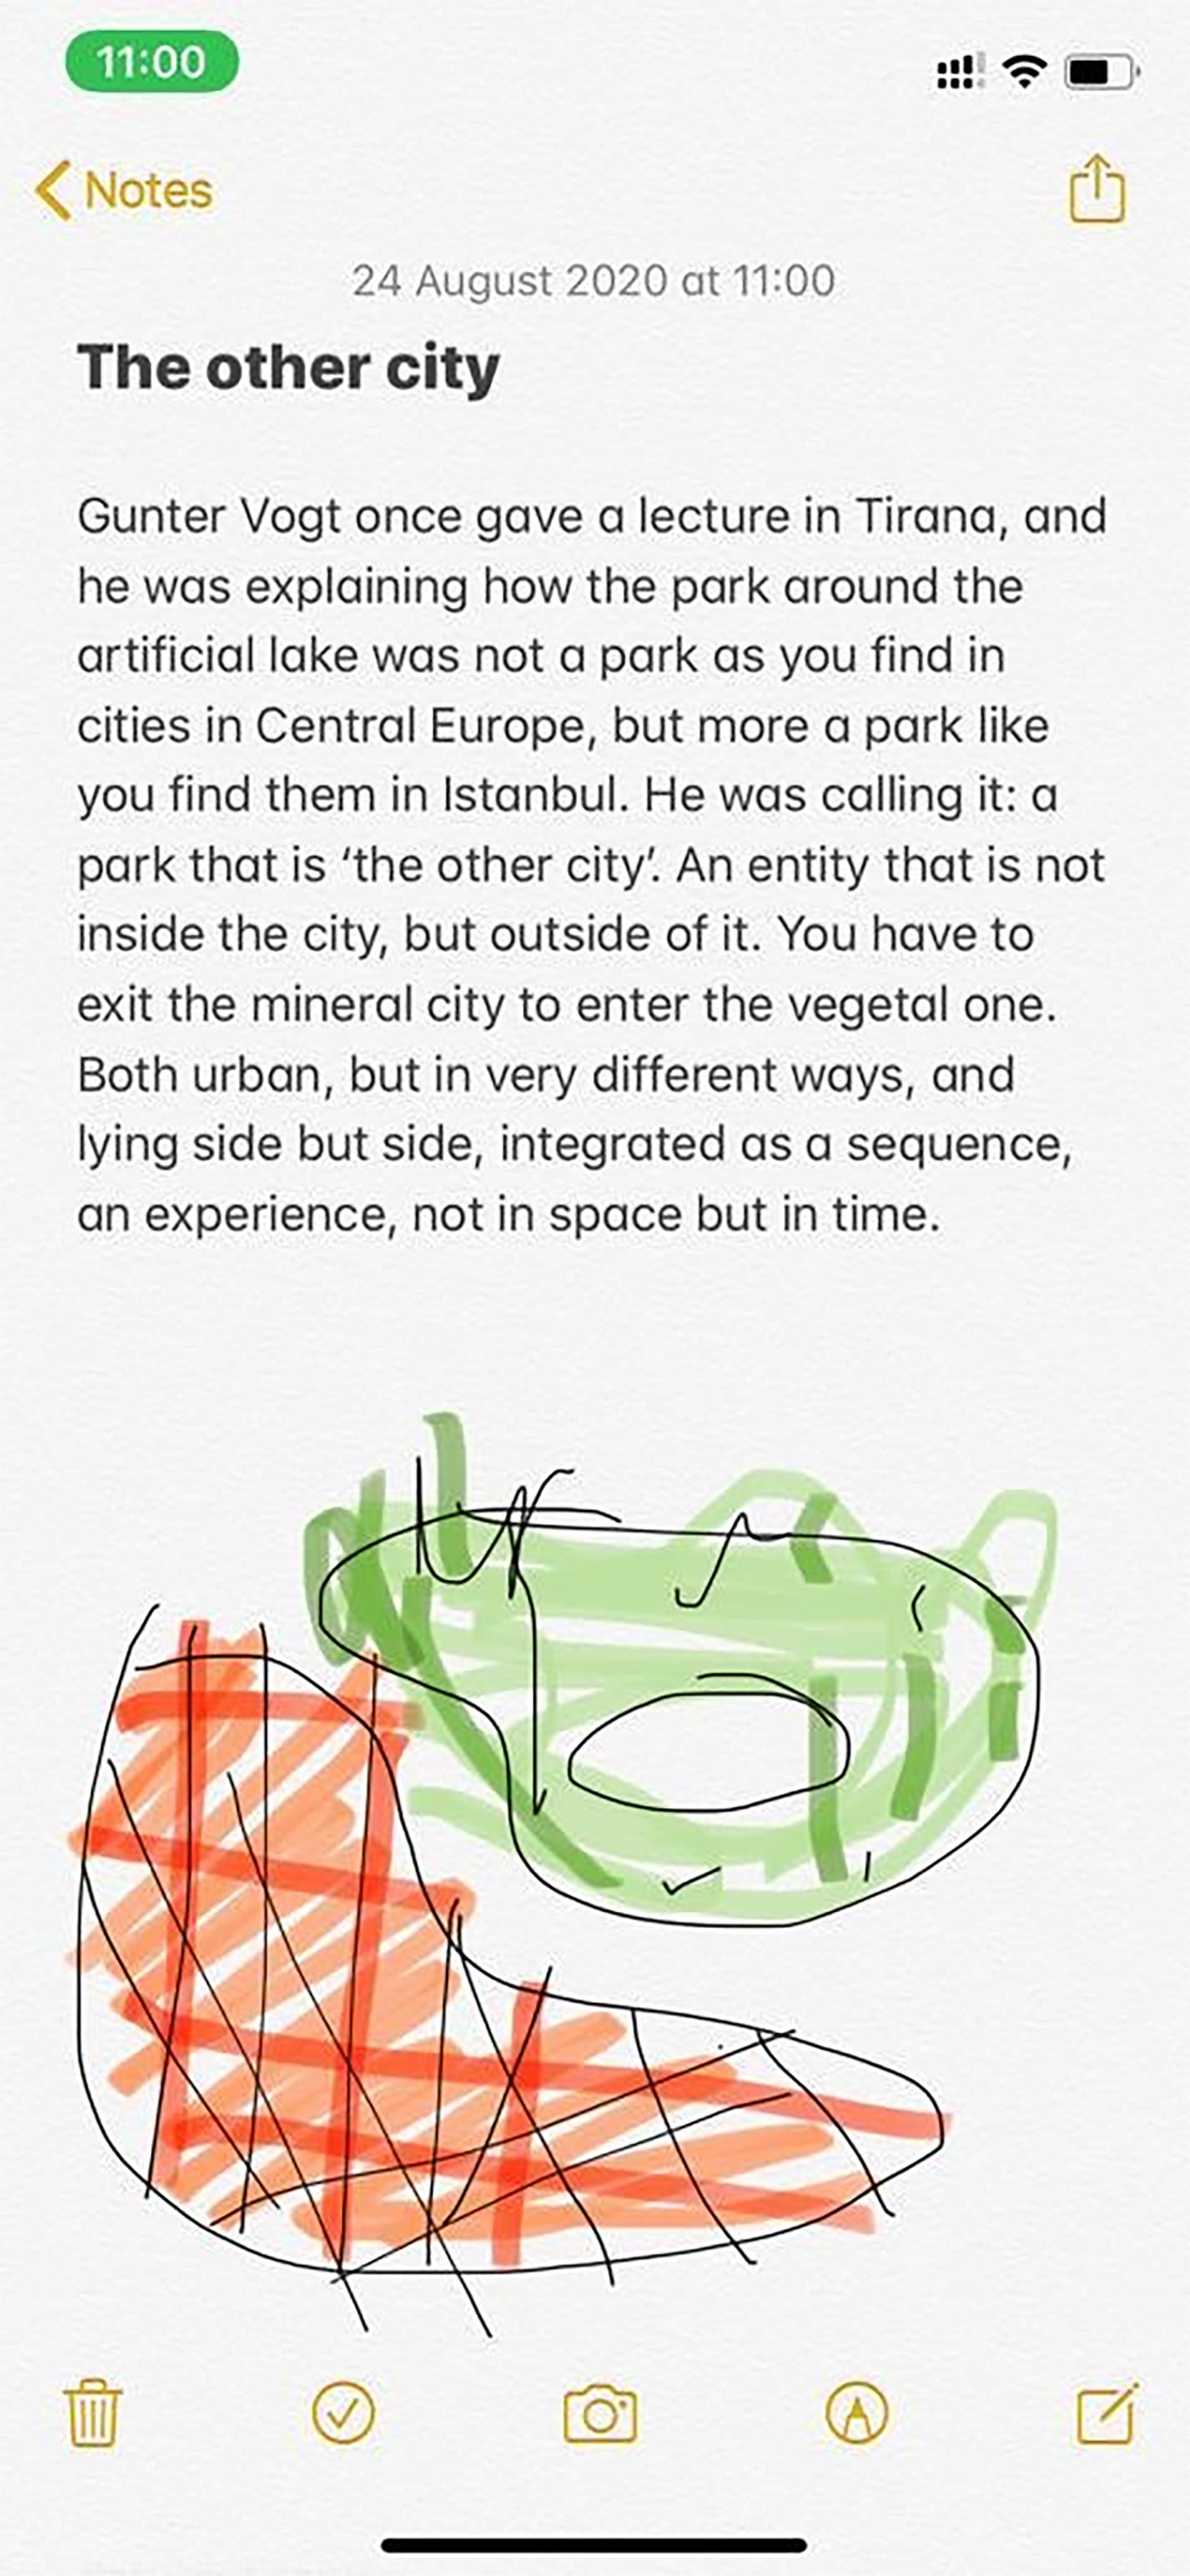 Concept: The other city